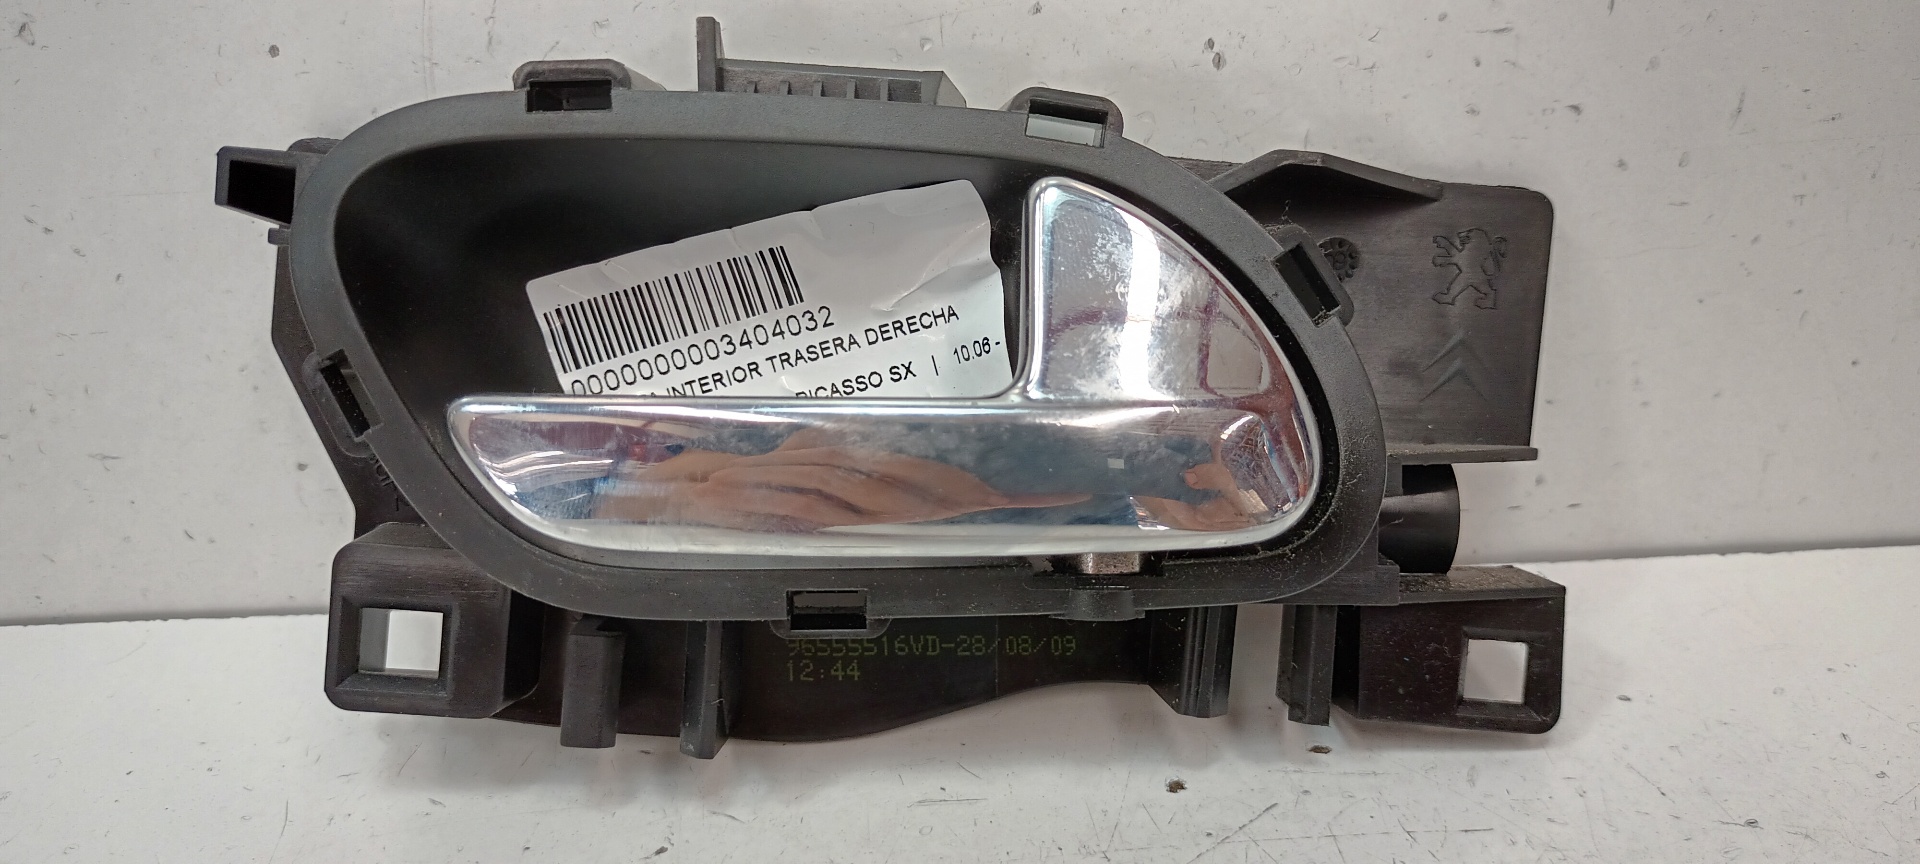 CITROËN C4 Picasso 1 generation (2006-2013) Right Rear Internal Opening Handle 96555516VD, CROMADA 22328228